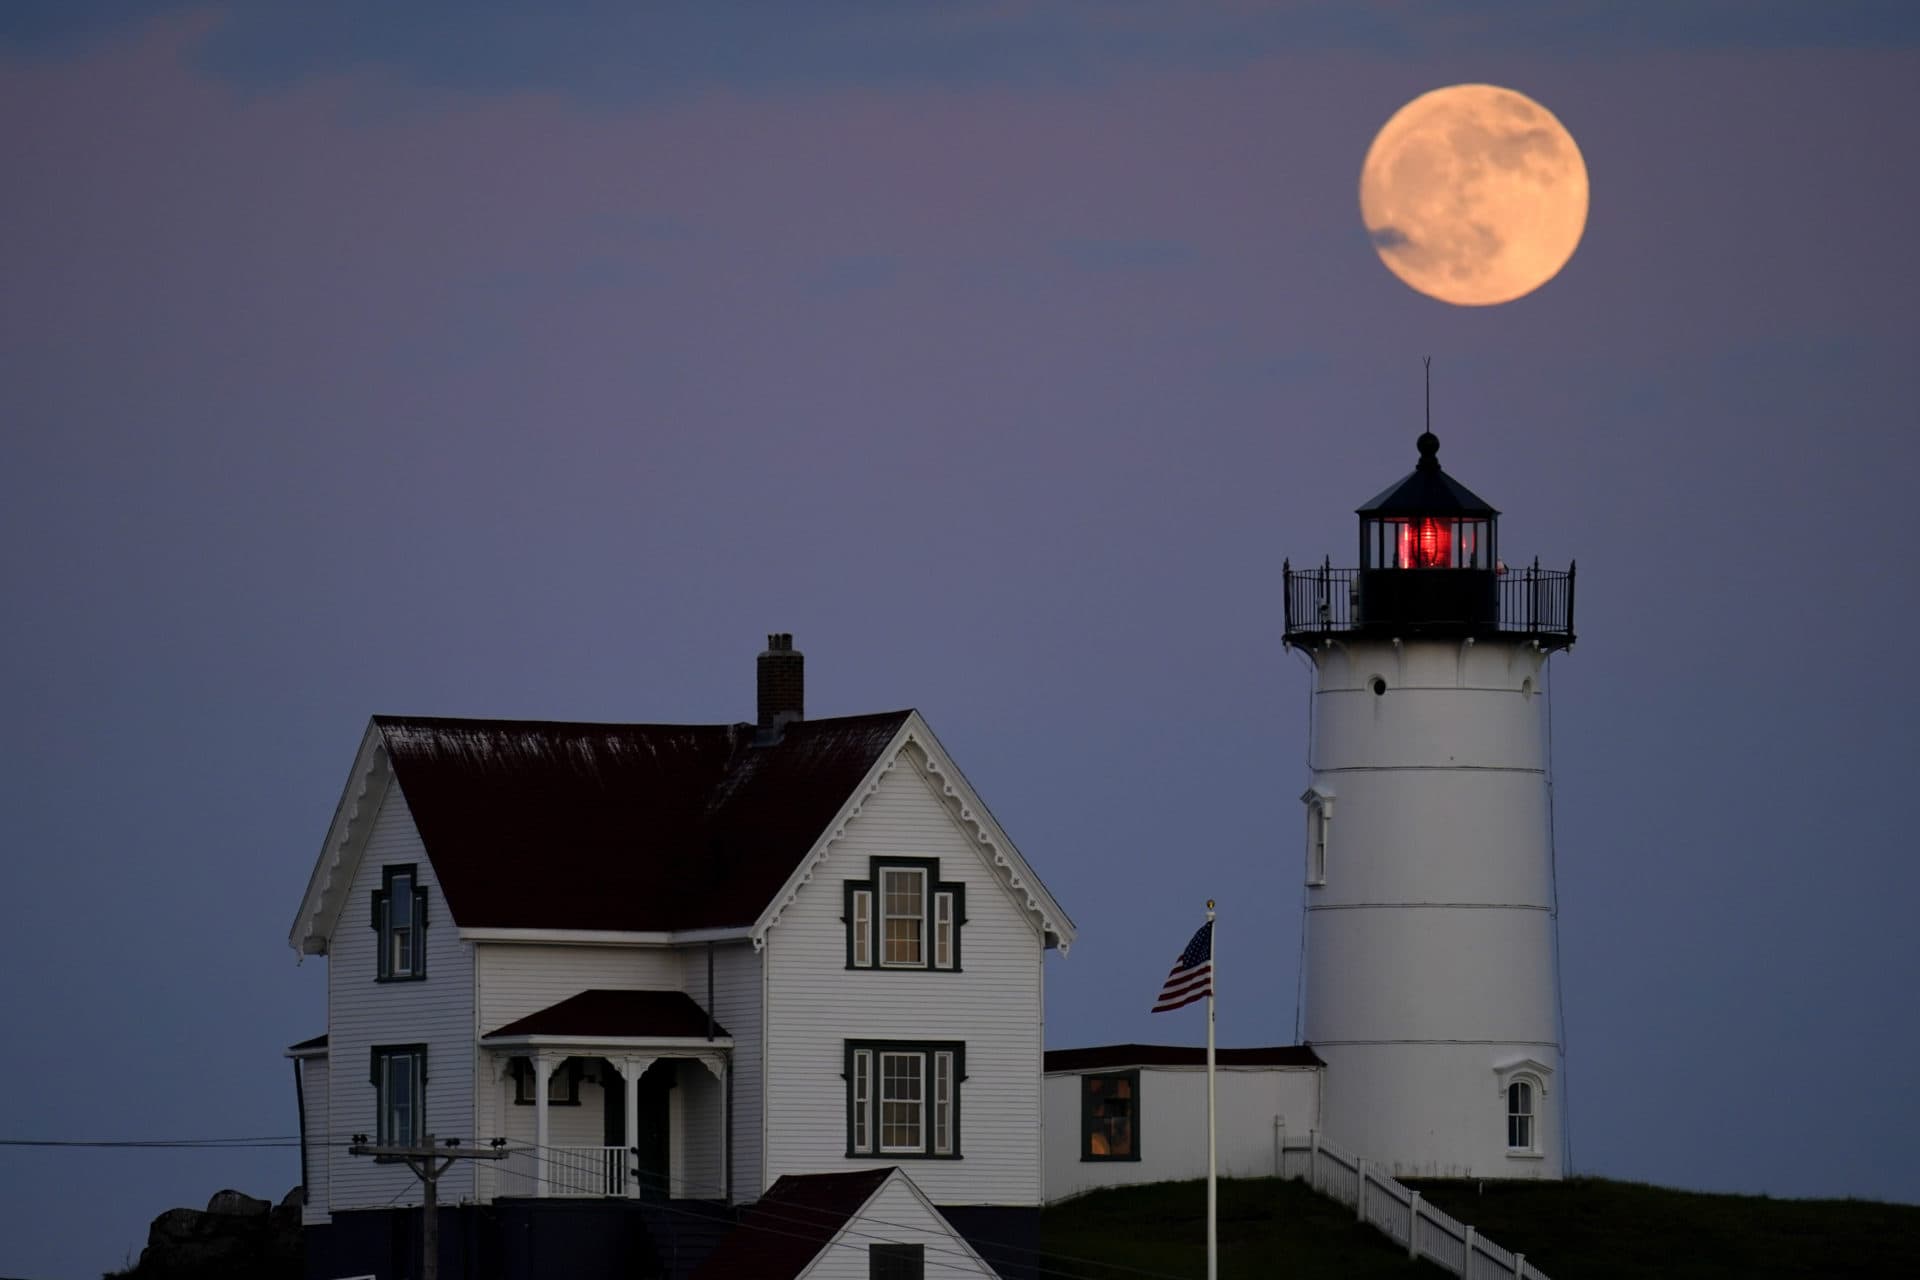 A waxing gibbous moon is seen at 98% percent full as it rises near the Nubble Light, Monday, June 13, 2022, in York, Maine. (Julio Cortez/AP)